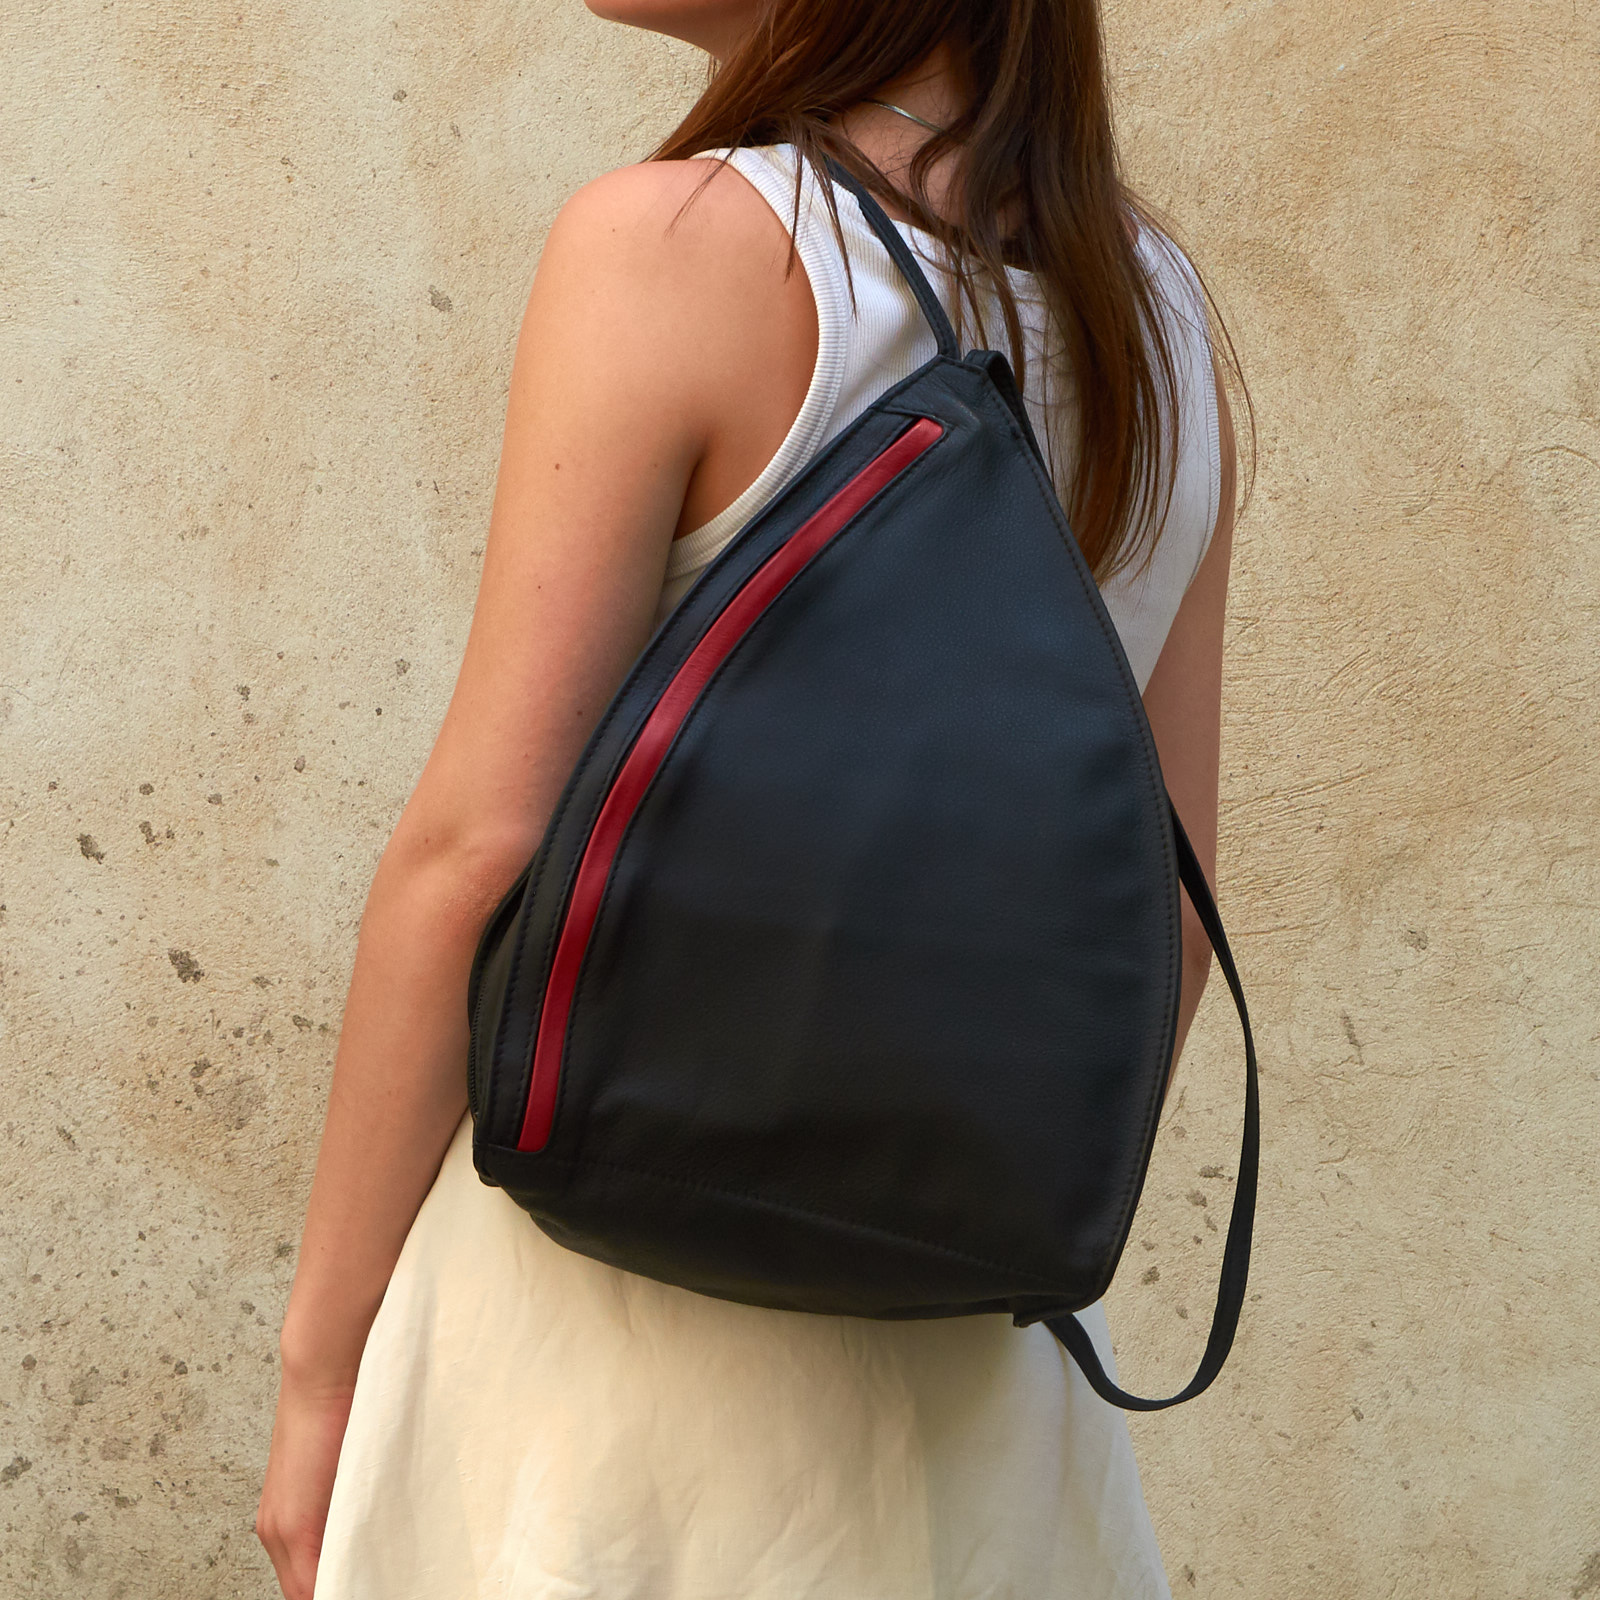 Woman wears Olbrish backpack Lenz in black and red nappa leather, size M, on her shoulder